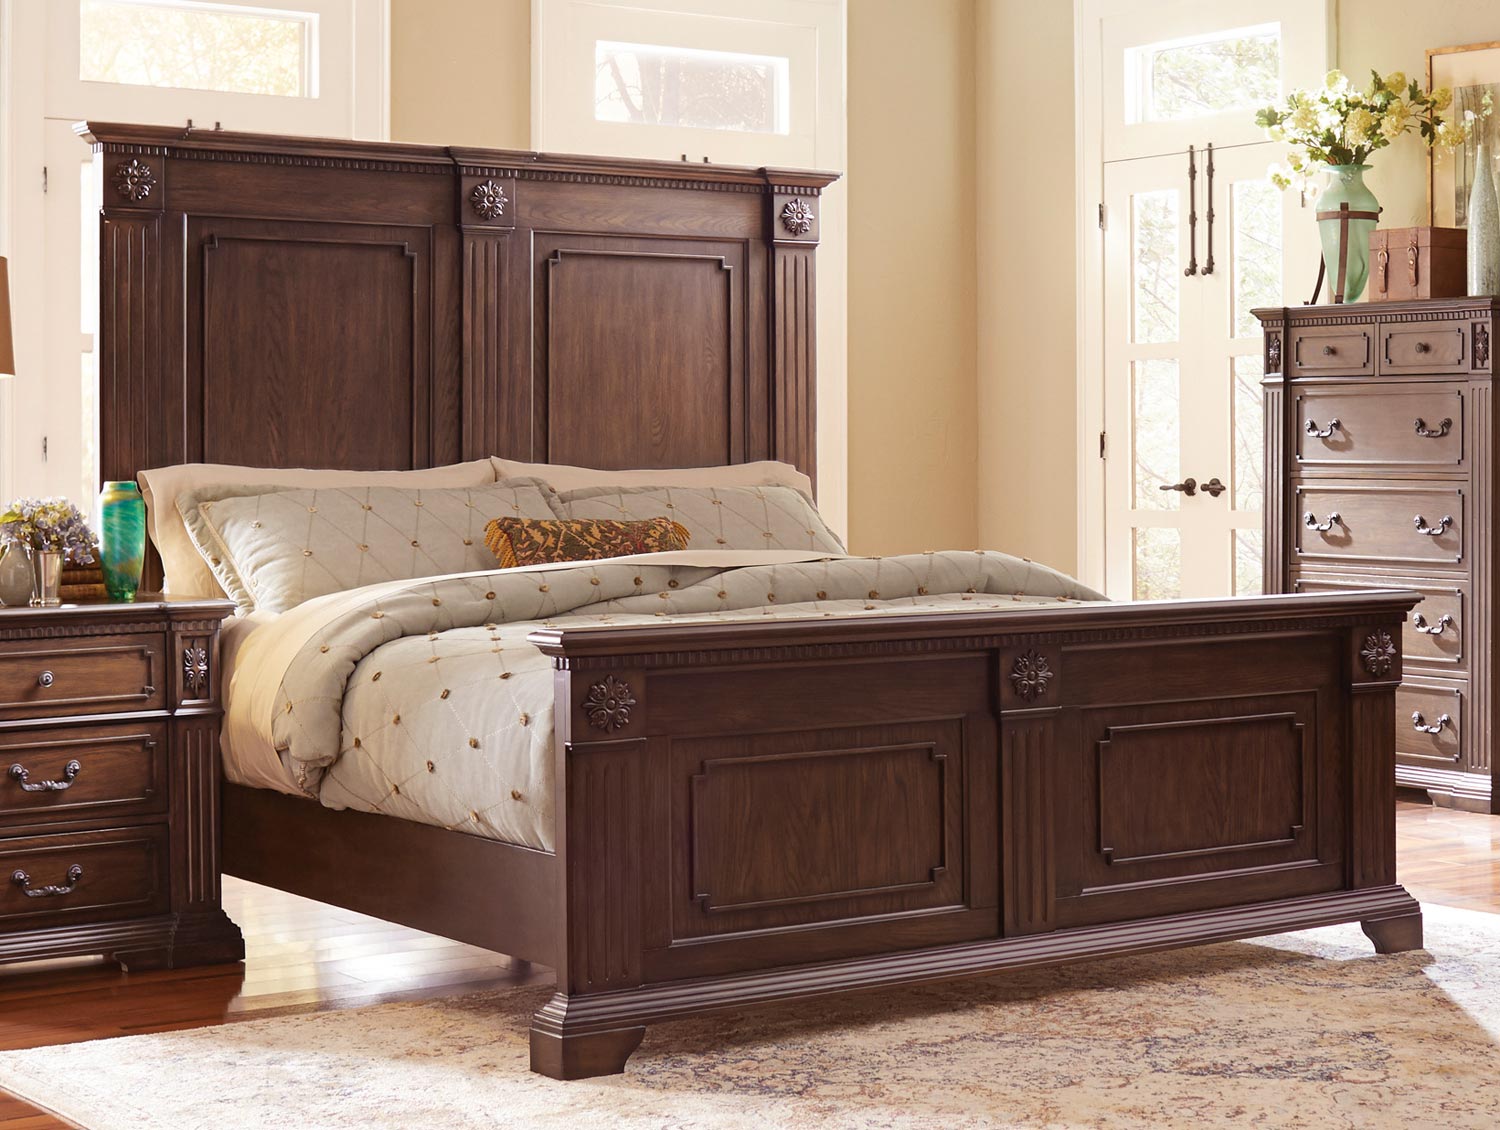 Homelegance Dothan Park Panel Bed - Rich Brown Cherry